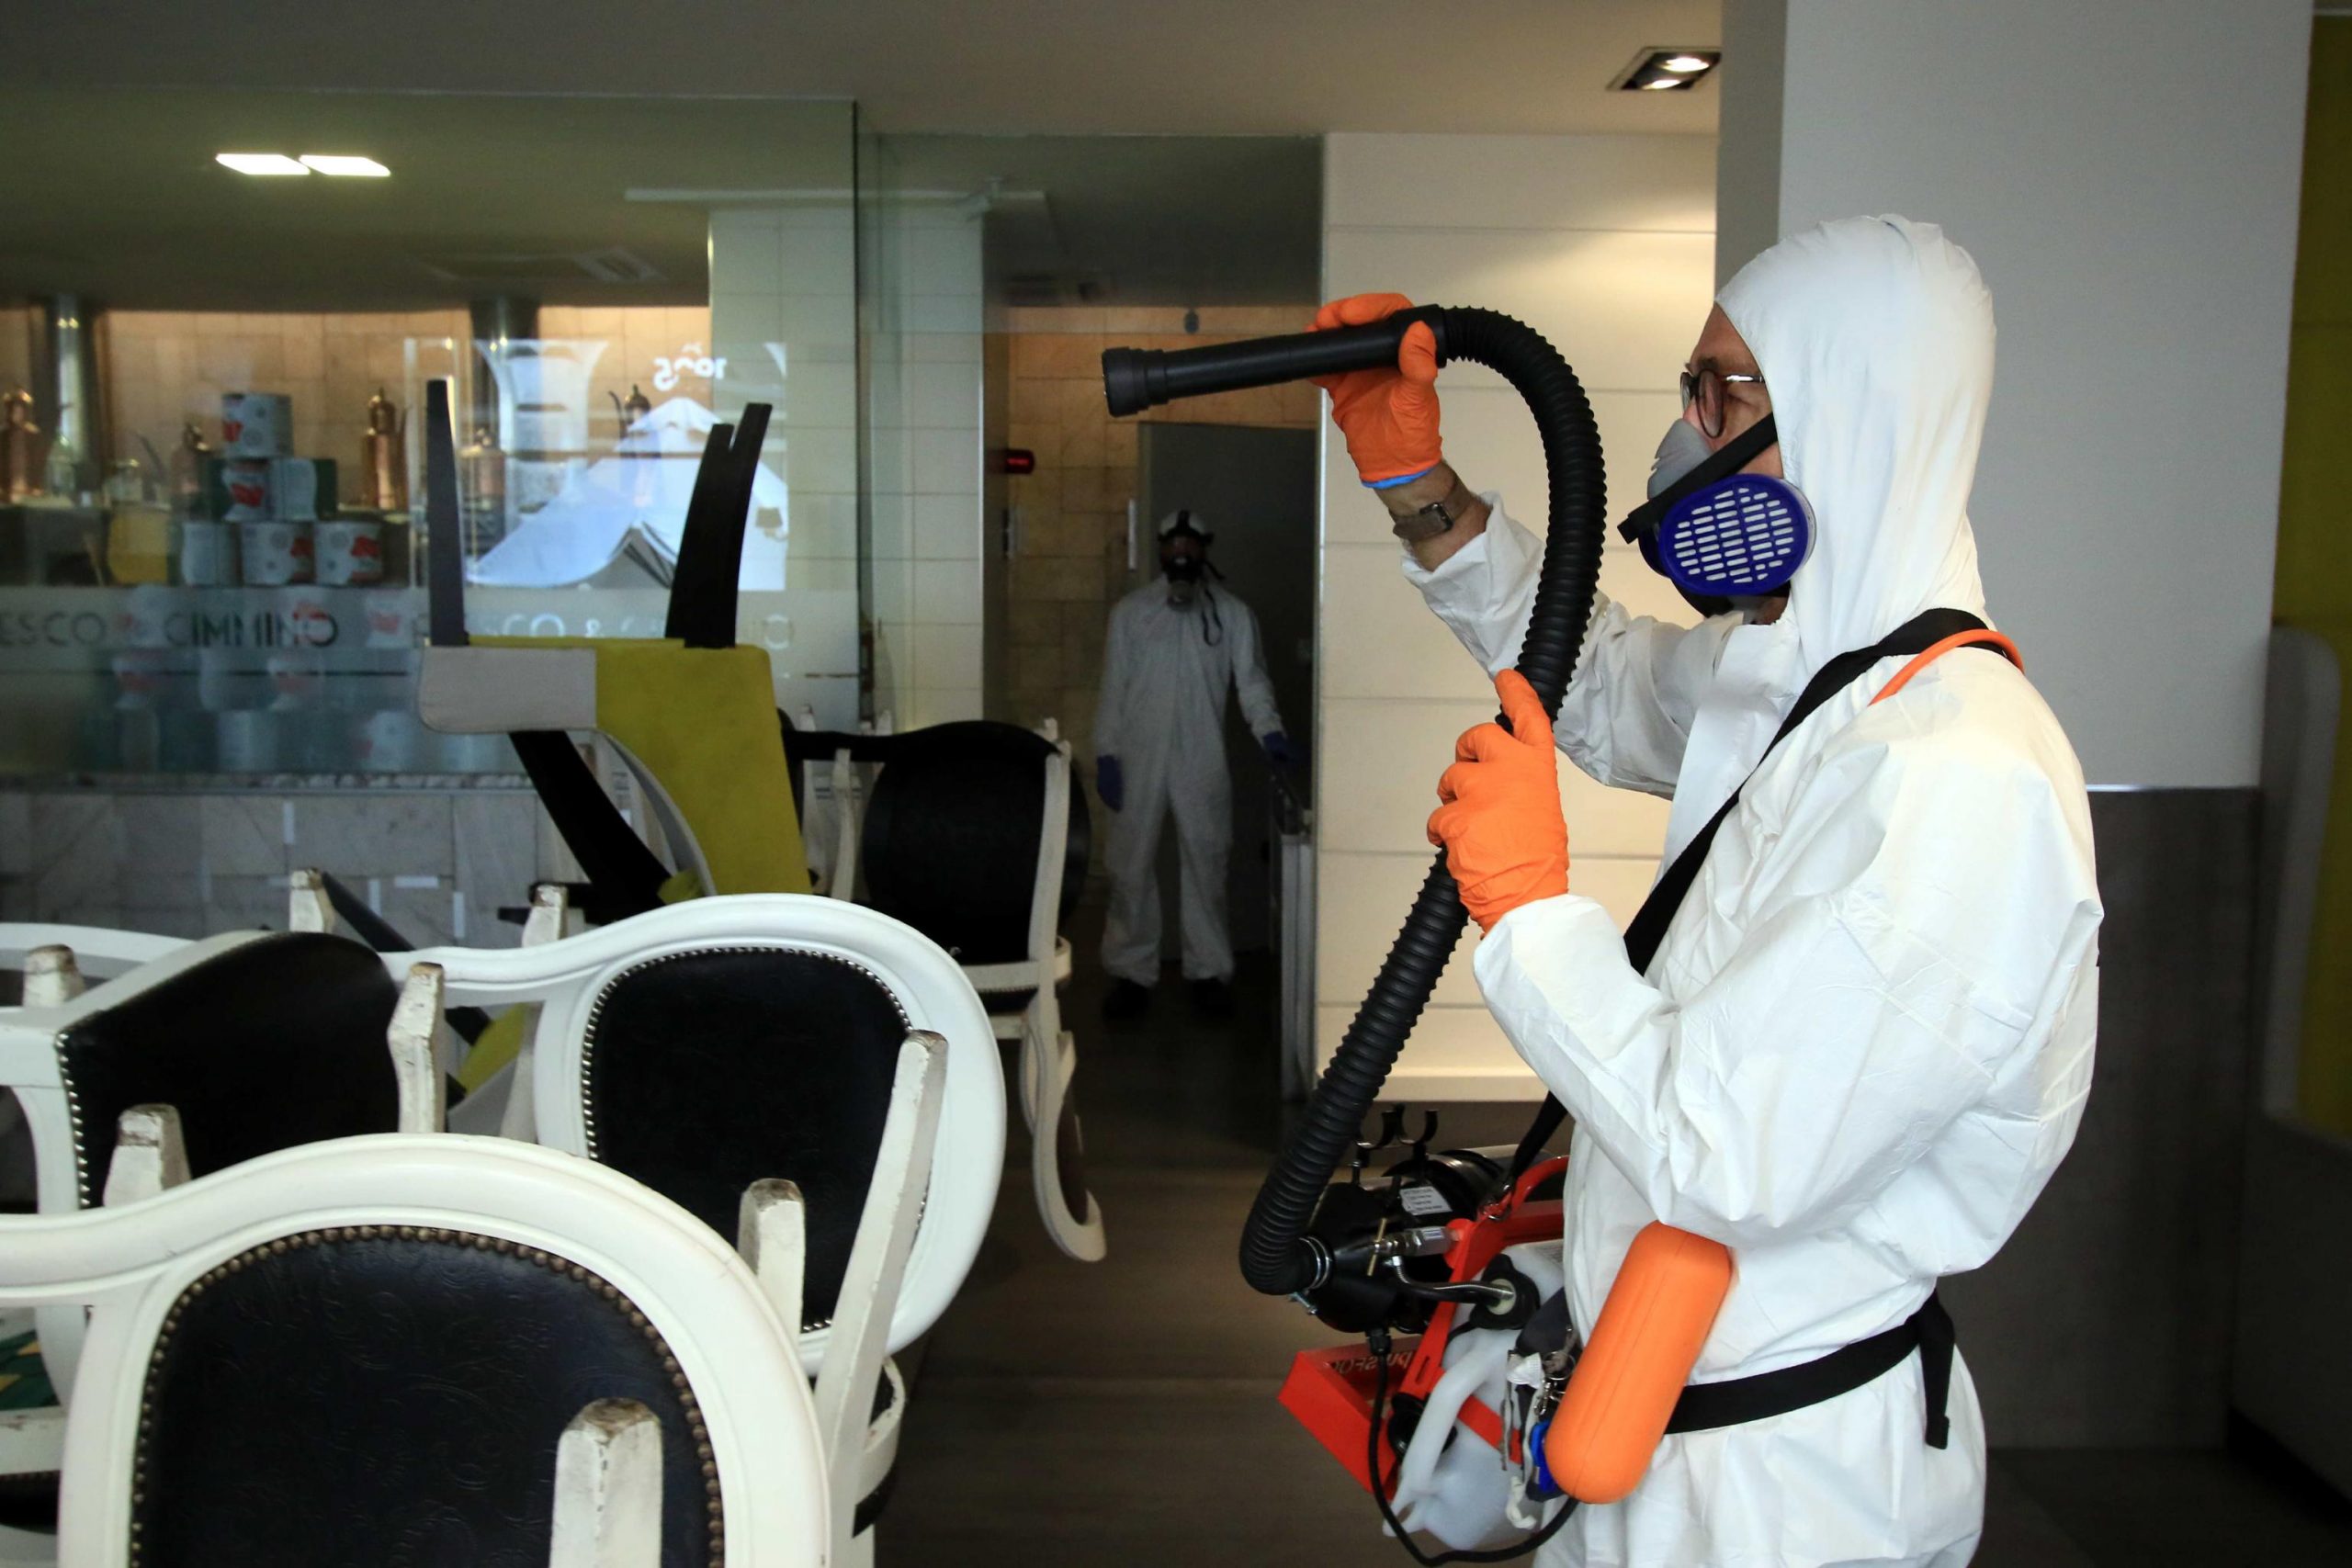 epa08393630 Workers sanitize a restaurant at Vittorio Emanuele Gallery in Milan, Italy, 30 April 2020. Countries around the world are taking increased measures to stem the widespread of the SARS-CoV-2 coronavirus which causes the COVID-19 disease.  EPA/PAOLO SALMOIRAGO